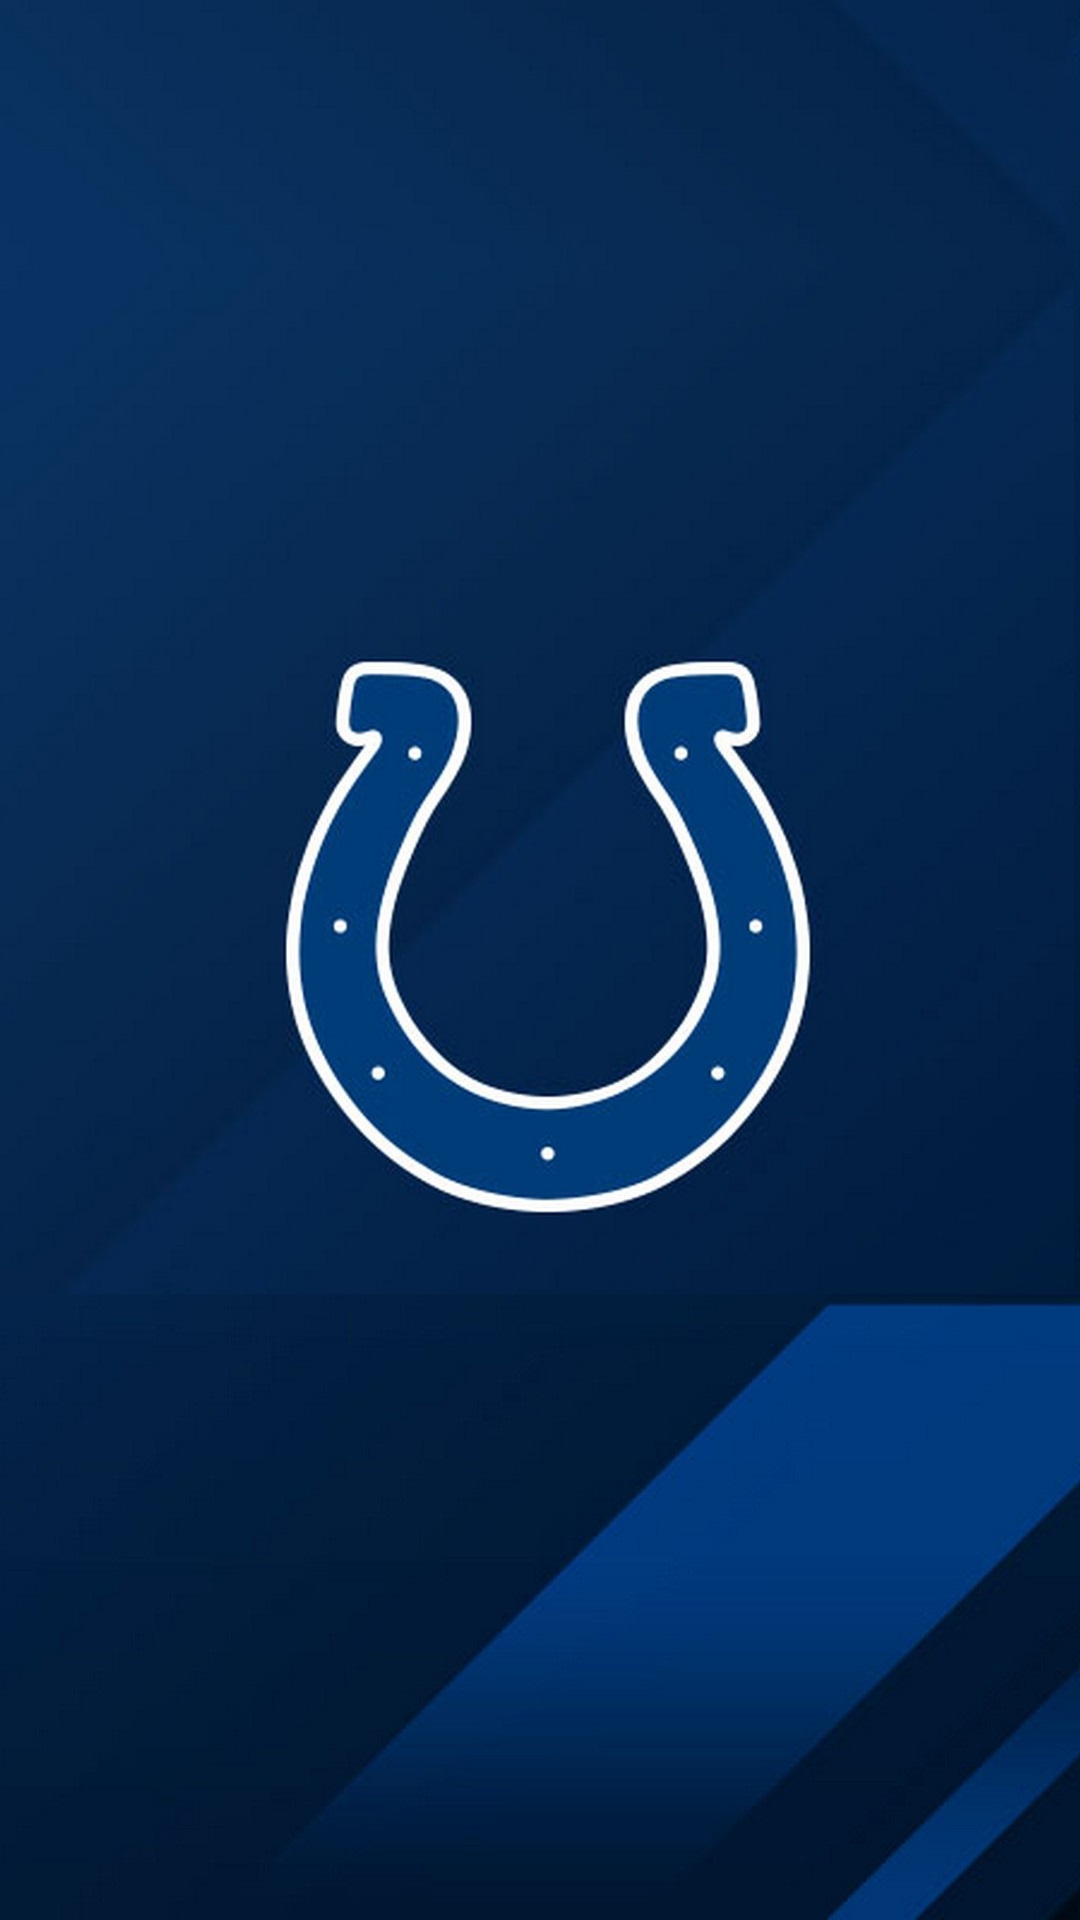 Indianapolis Colts NFL iPhone Lock Screen Wallpaper With high-resolution 1080X1920 pixel. Donwload and set as wallpaper for your iPhone X, iPhone XS home screen backgrounds, XS Max, XR, iPhone8 lock screen wallpaper, iPhone 7, 6, SE, and other mobile devices